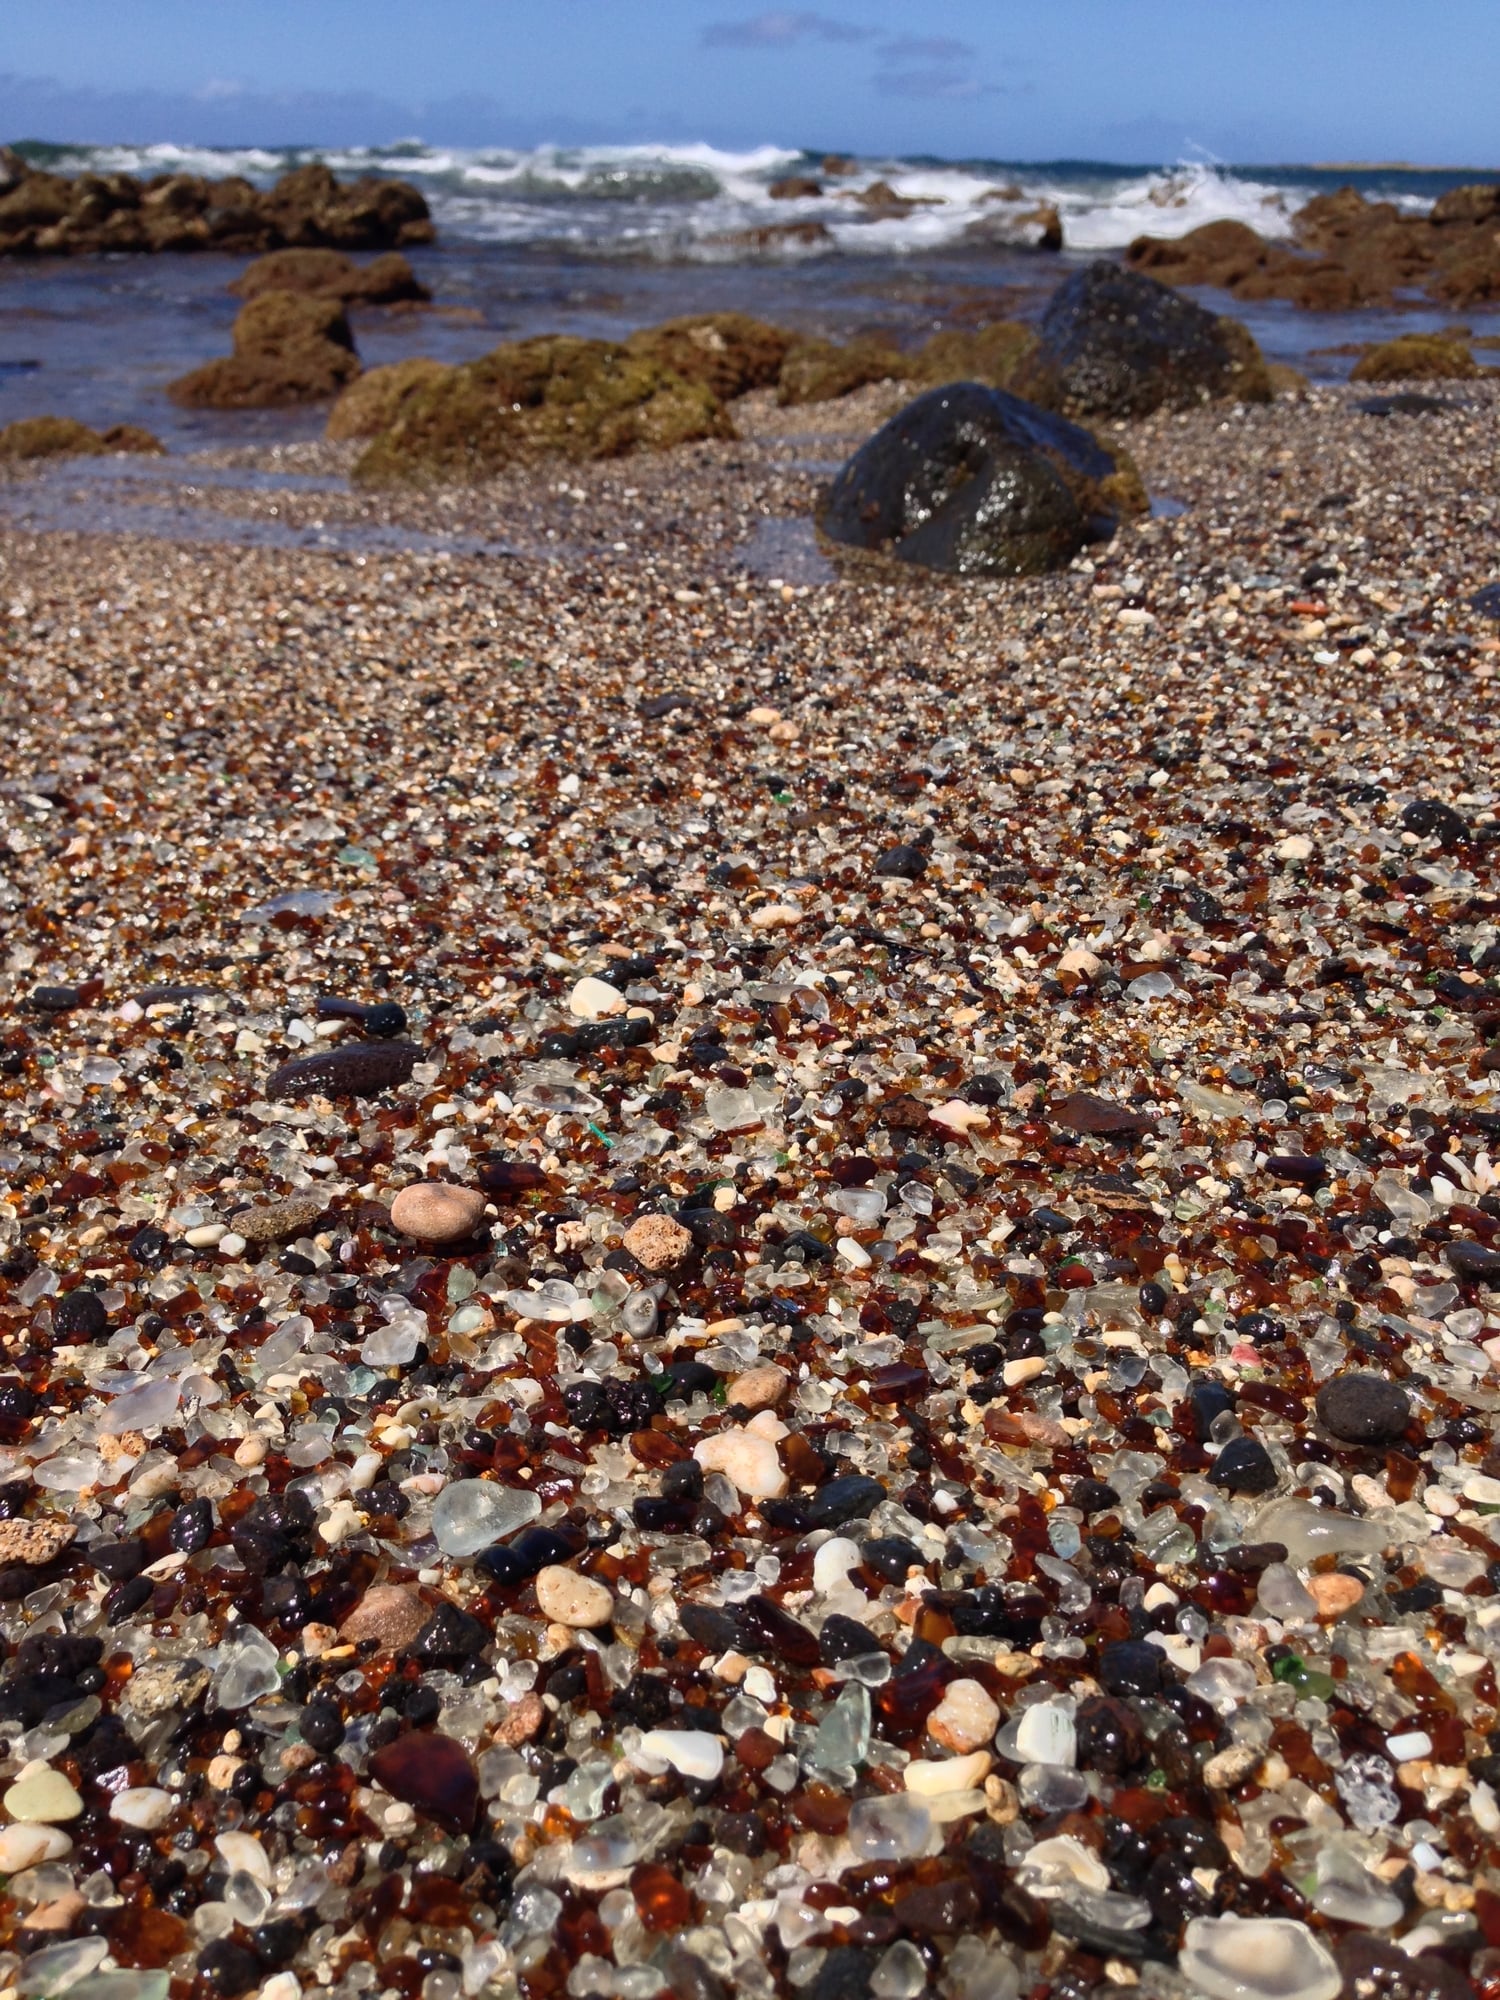 You'll Want To Visit This Beautiful Sea Glass Beach In Hawaii